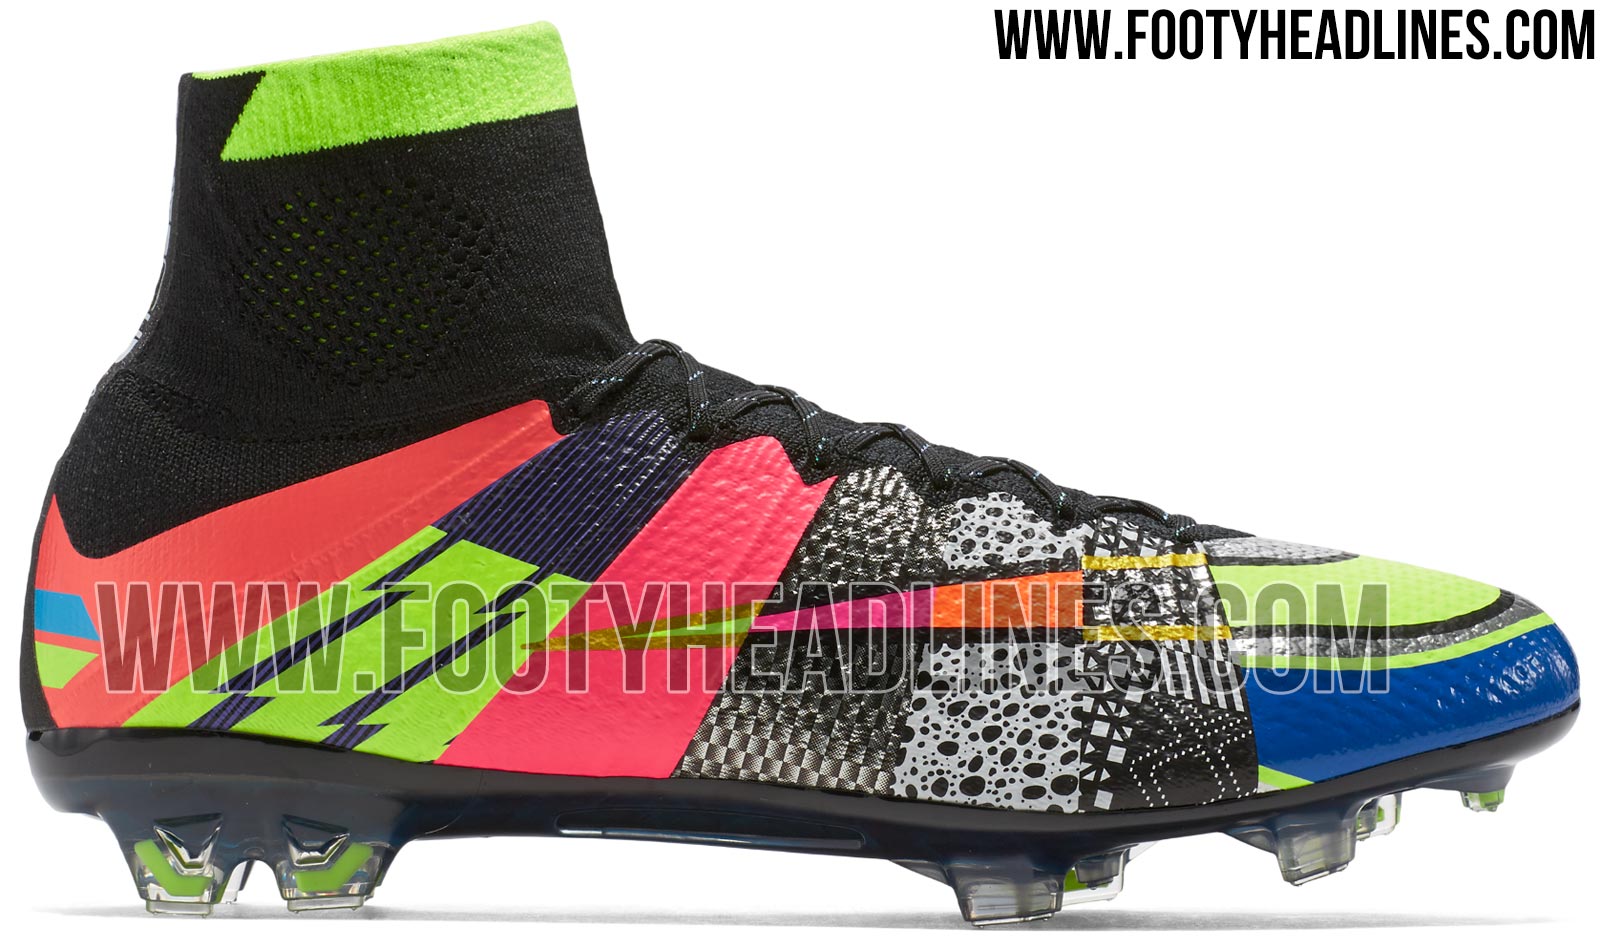 nike-what-the-mercurial-superfly-boots-3.jpg